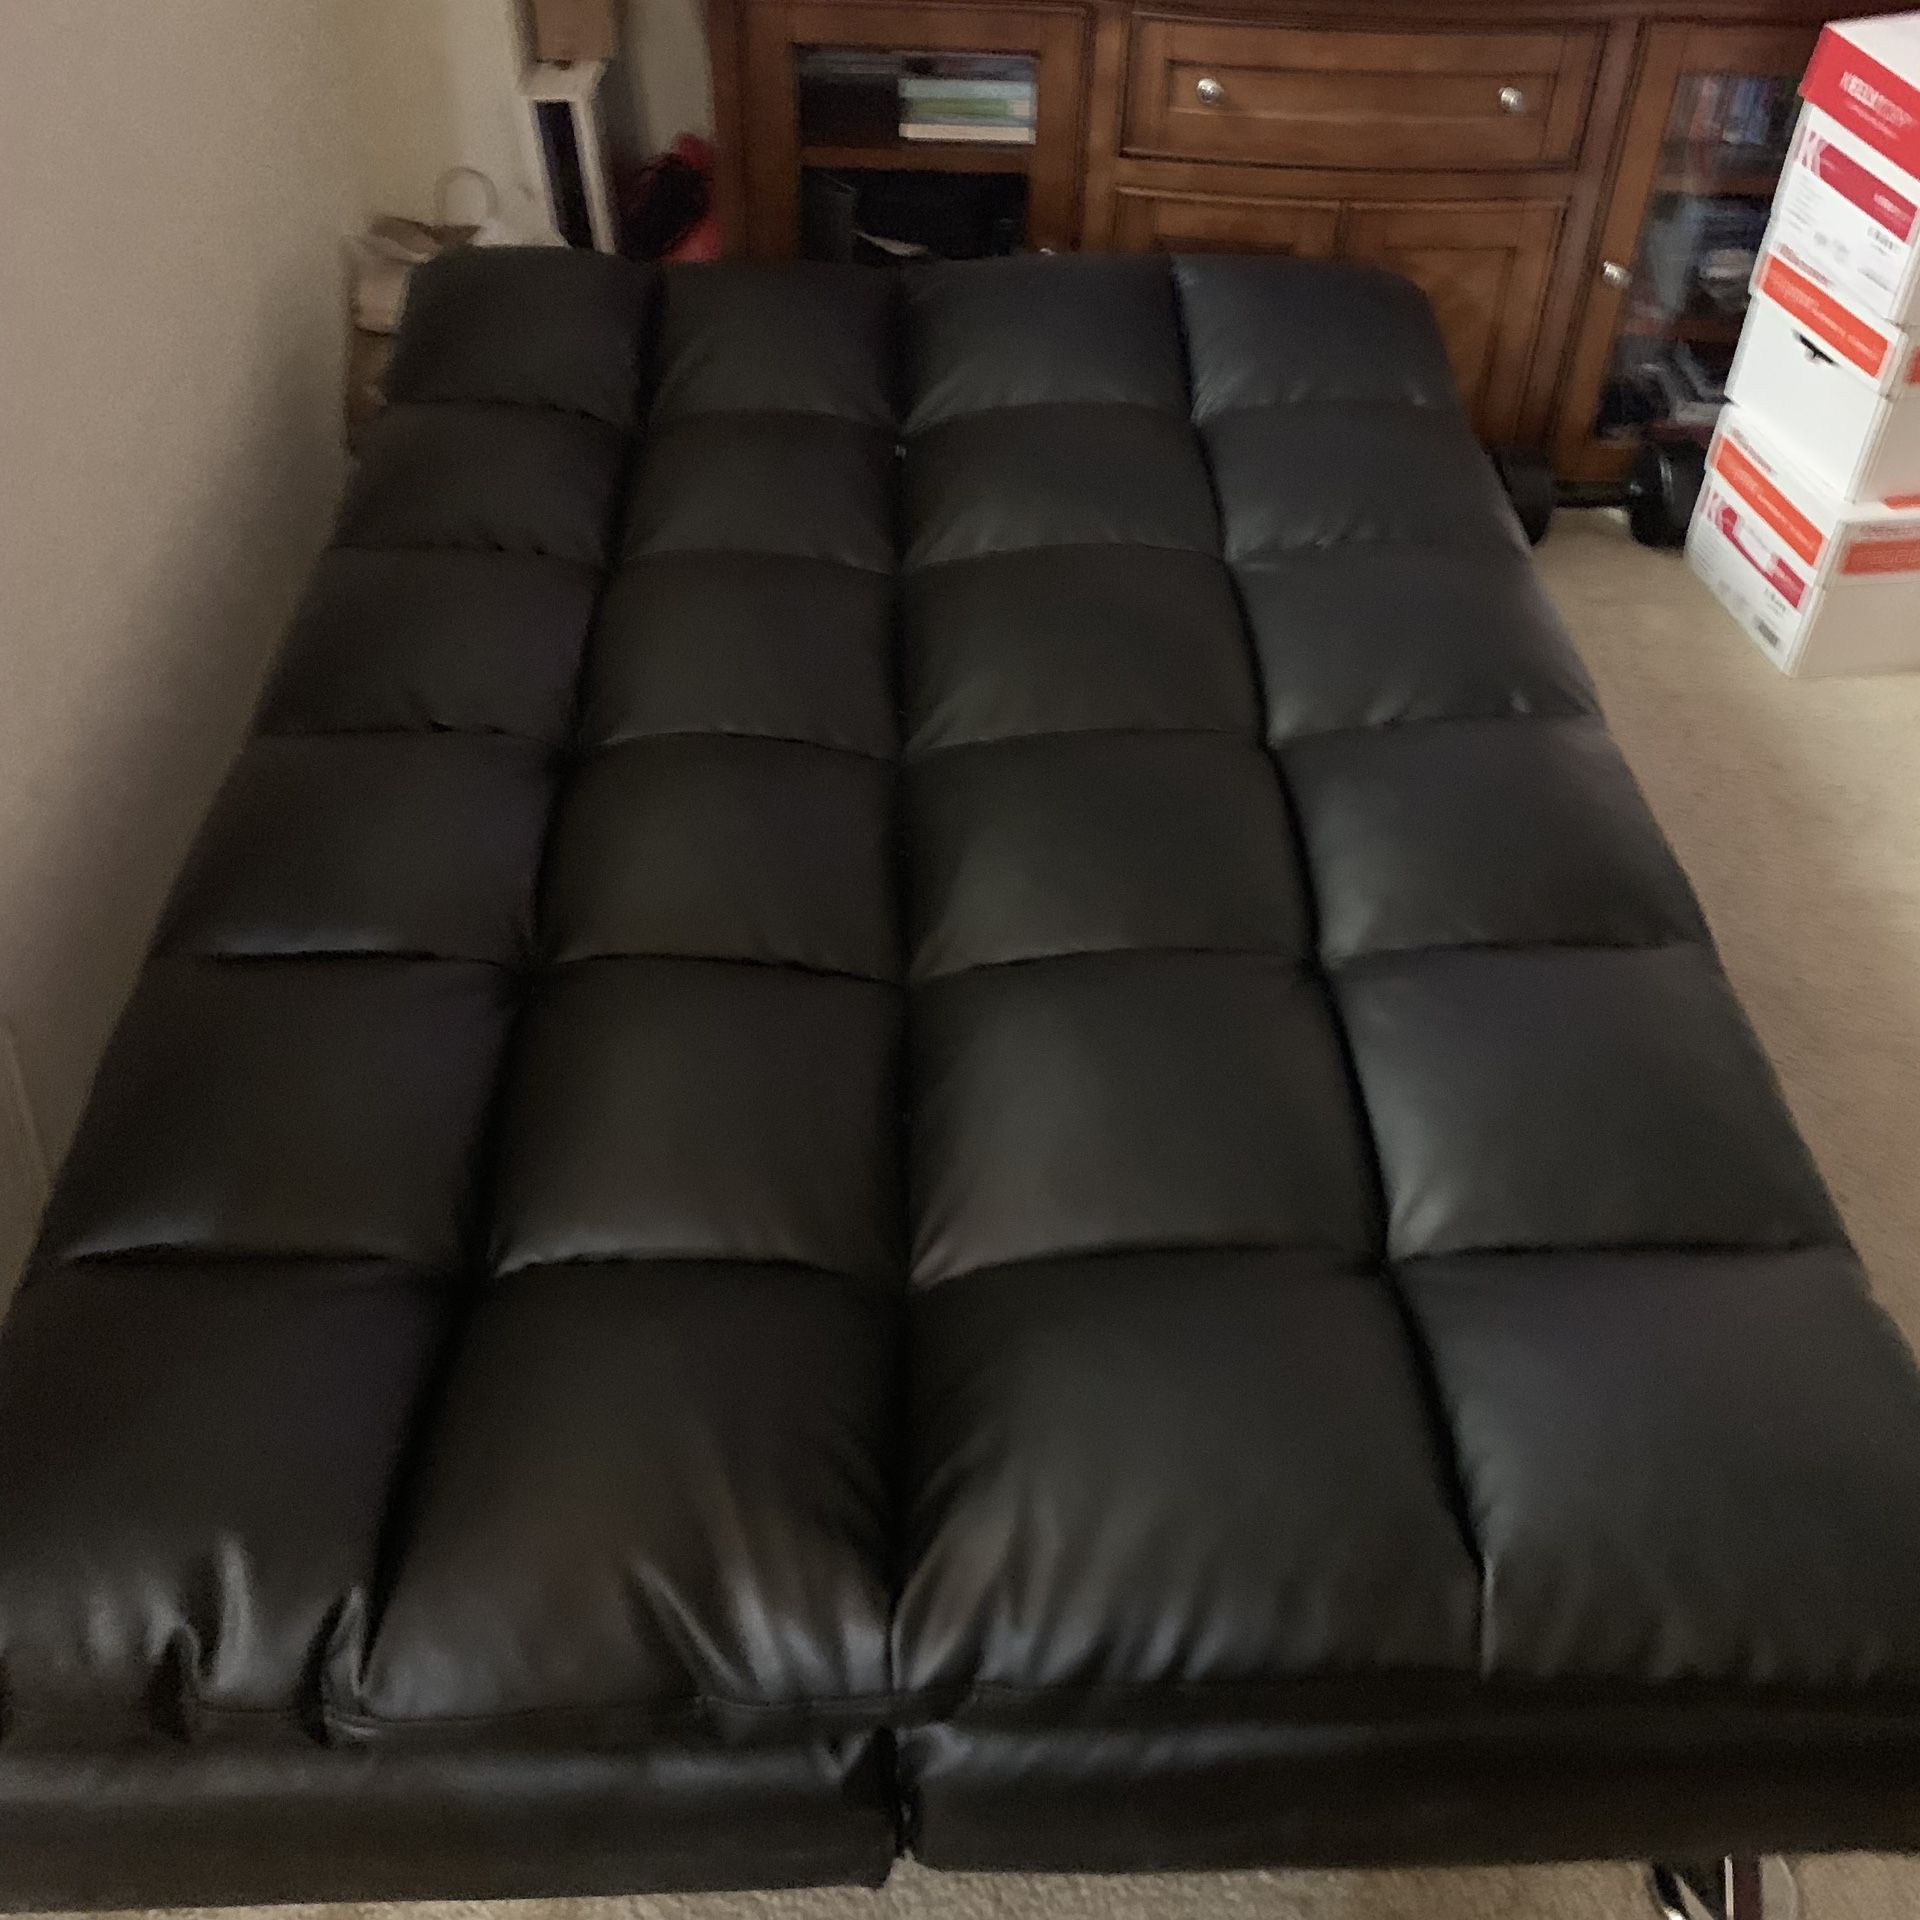 Black leather sofa bed couch